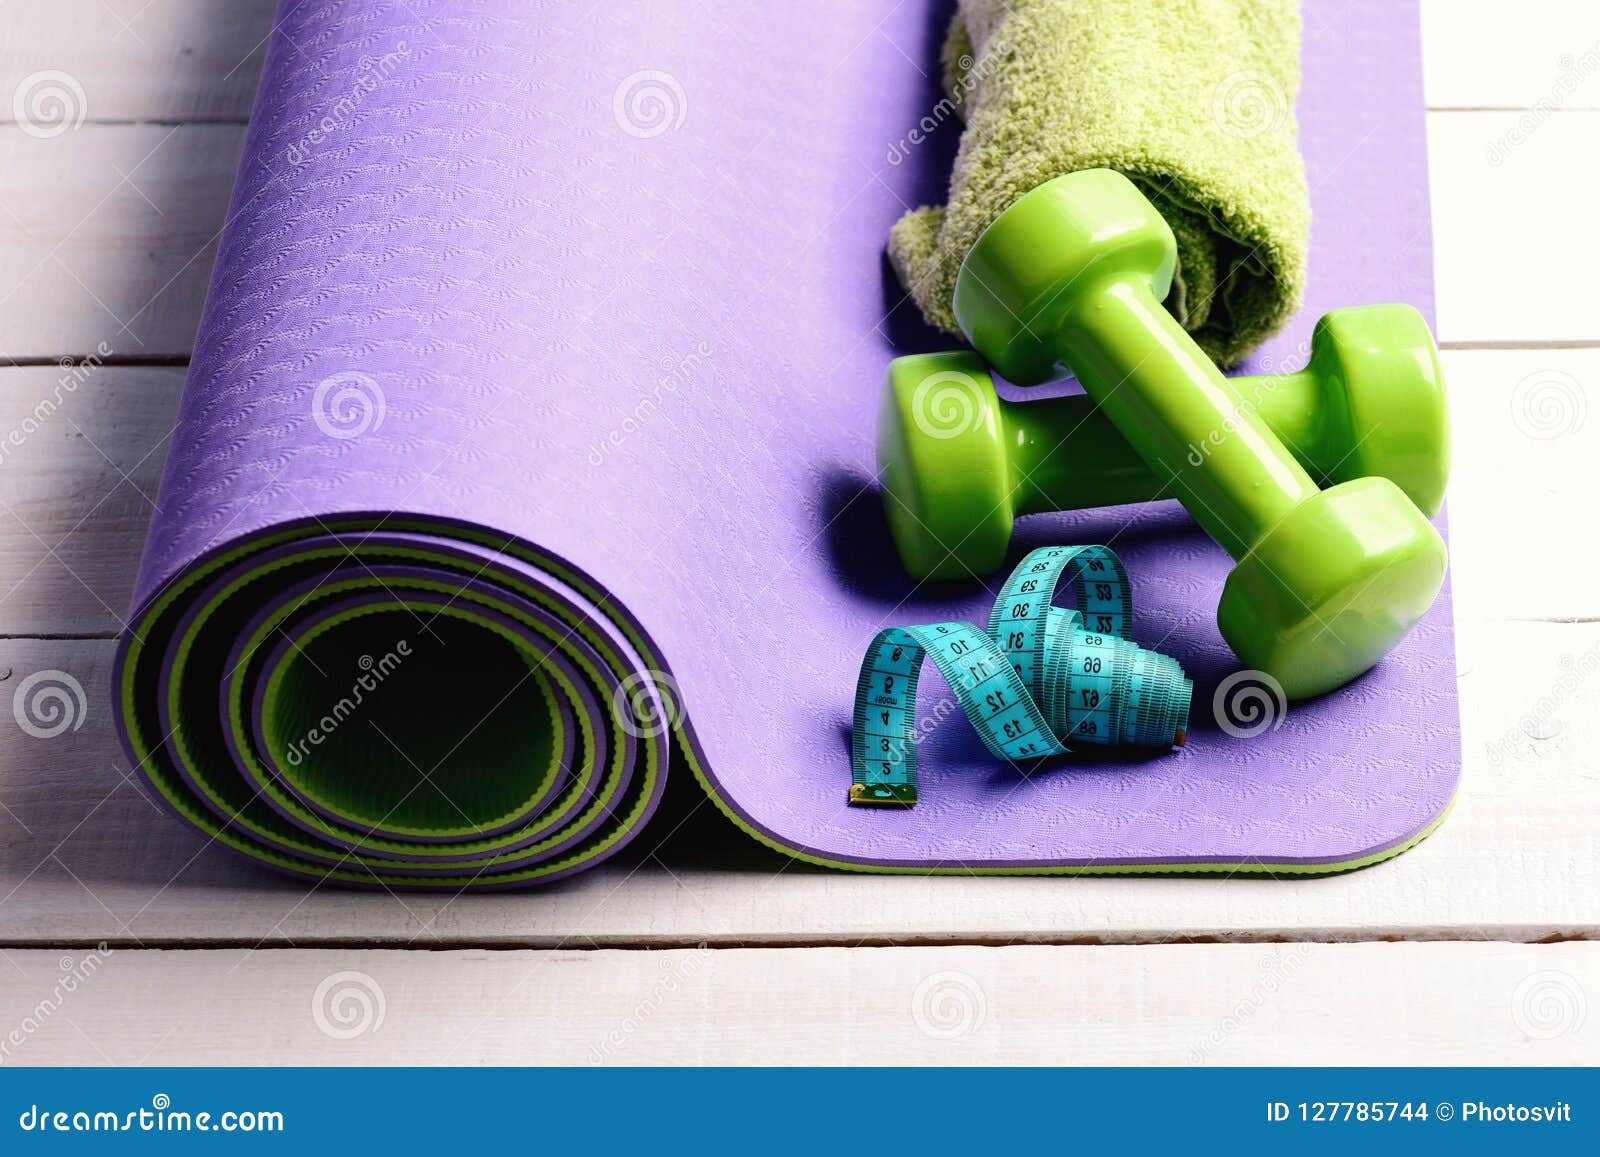 Shaping and Fitness Equipment. Barbells Near Cyan Measuring Tape Roll ...